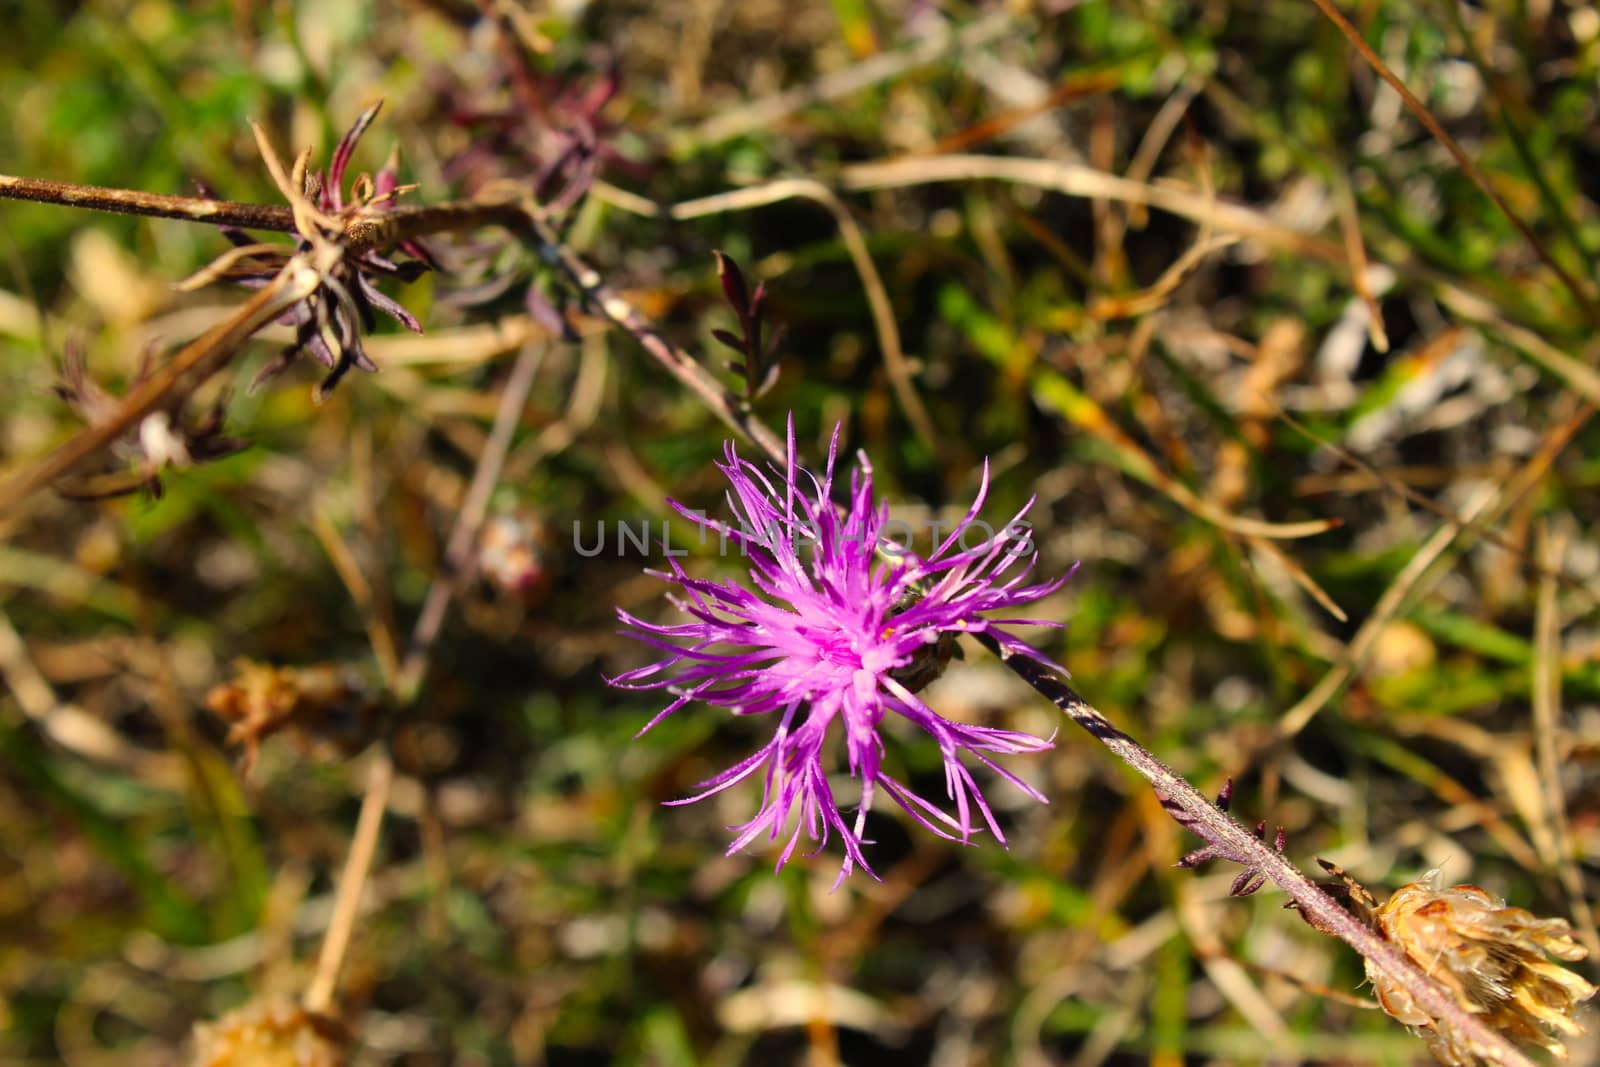 Centaurea jacea (brown knapweed or brownray knapweed) is a species of herbaceous perennial plants in the genus Centaurea native to dry meadows and open woodland. by mahirrov